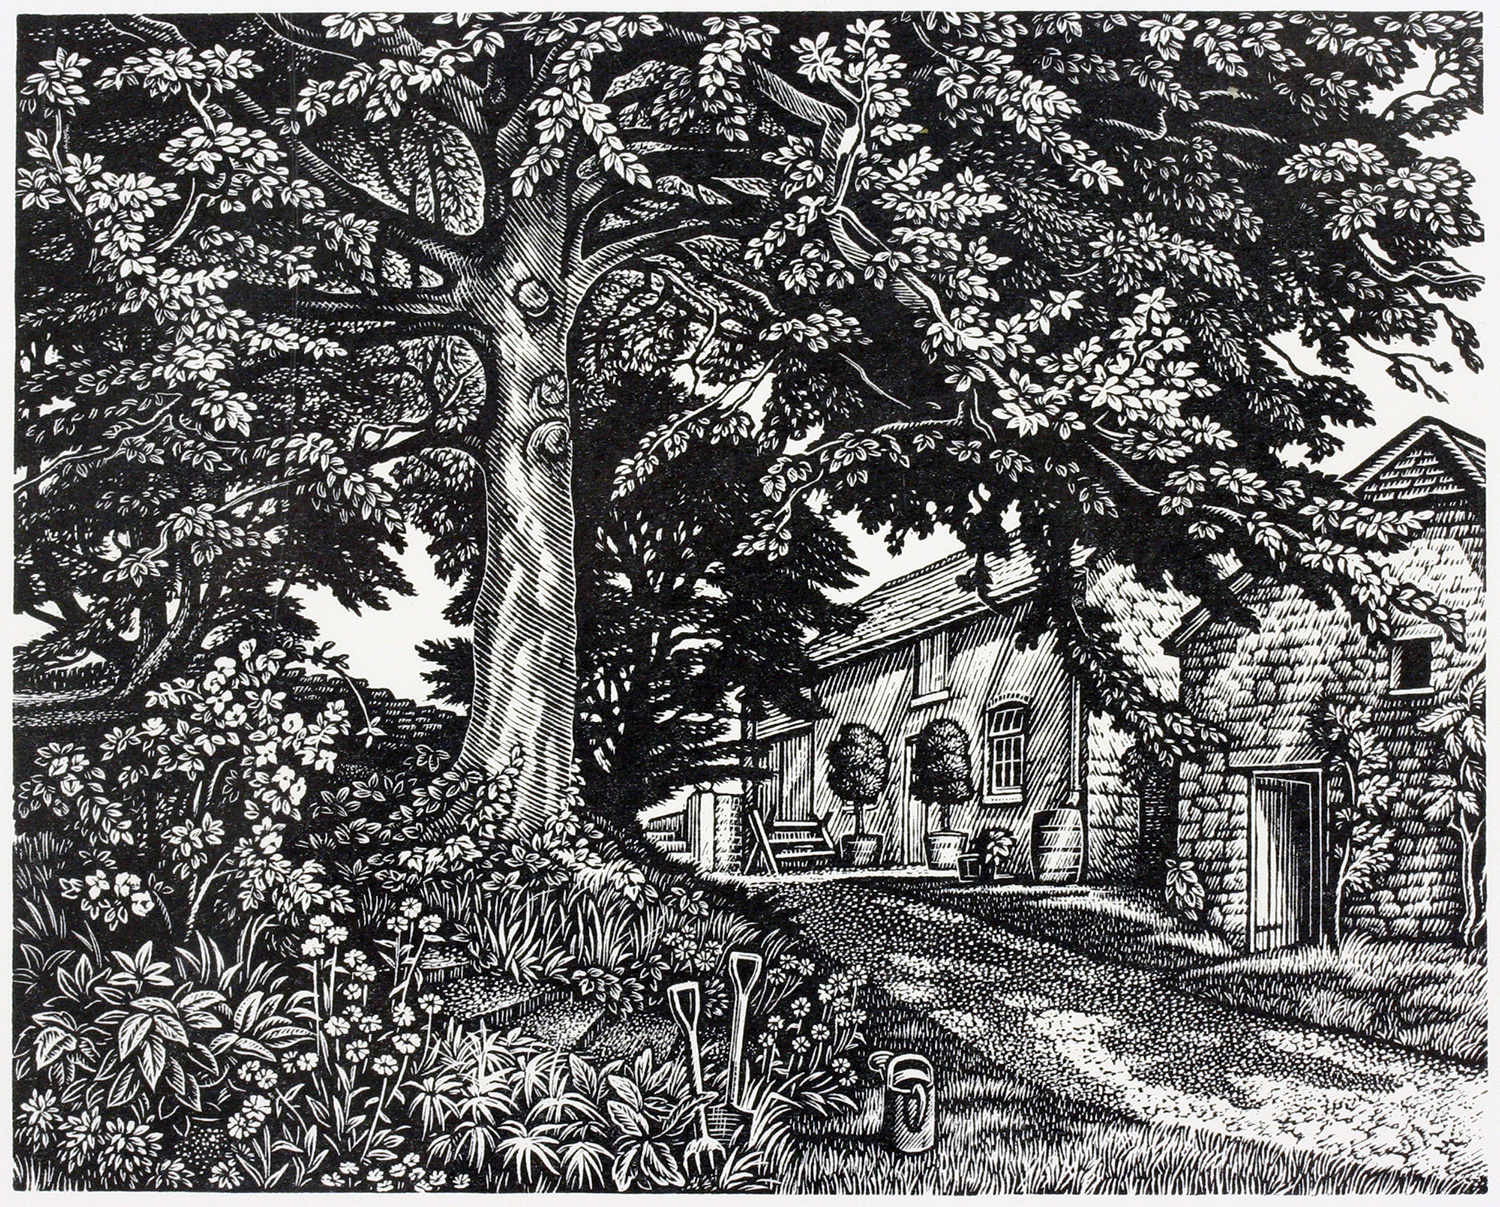 The Old Rectory Garden by Howard Phipps